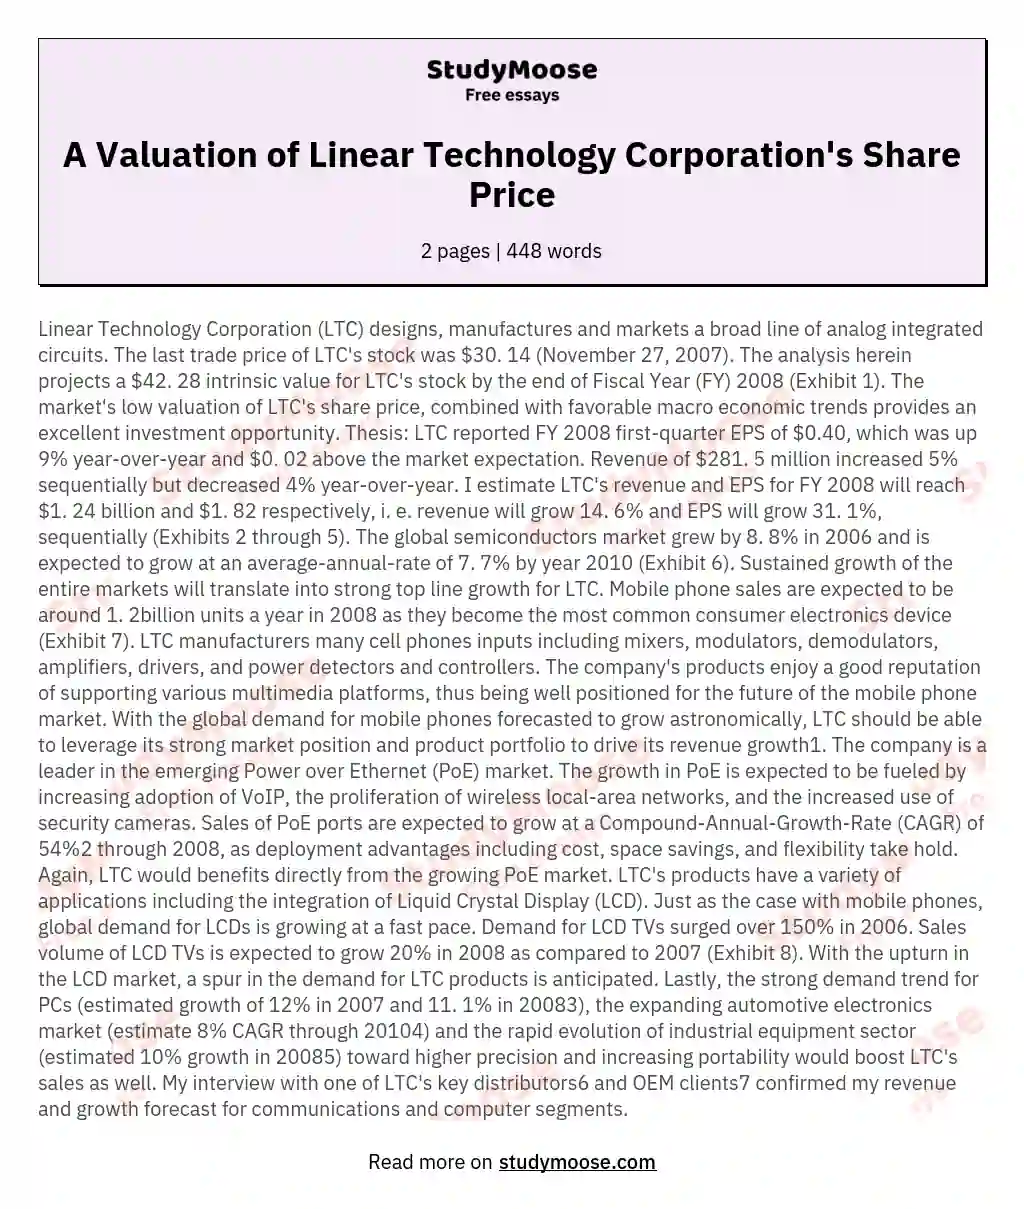 A Valuation of Linear Technology Corporation's Share Price essay